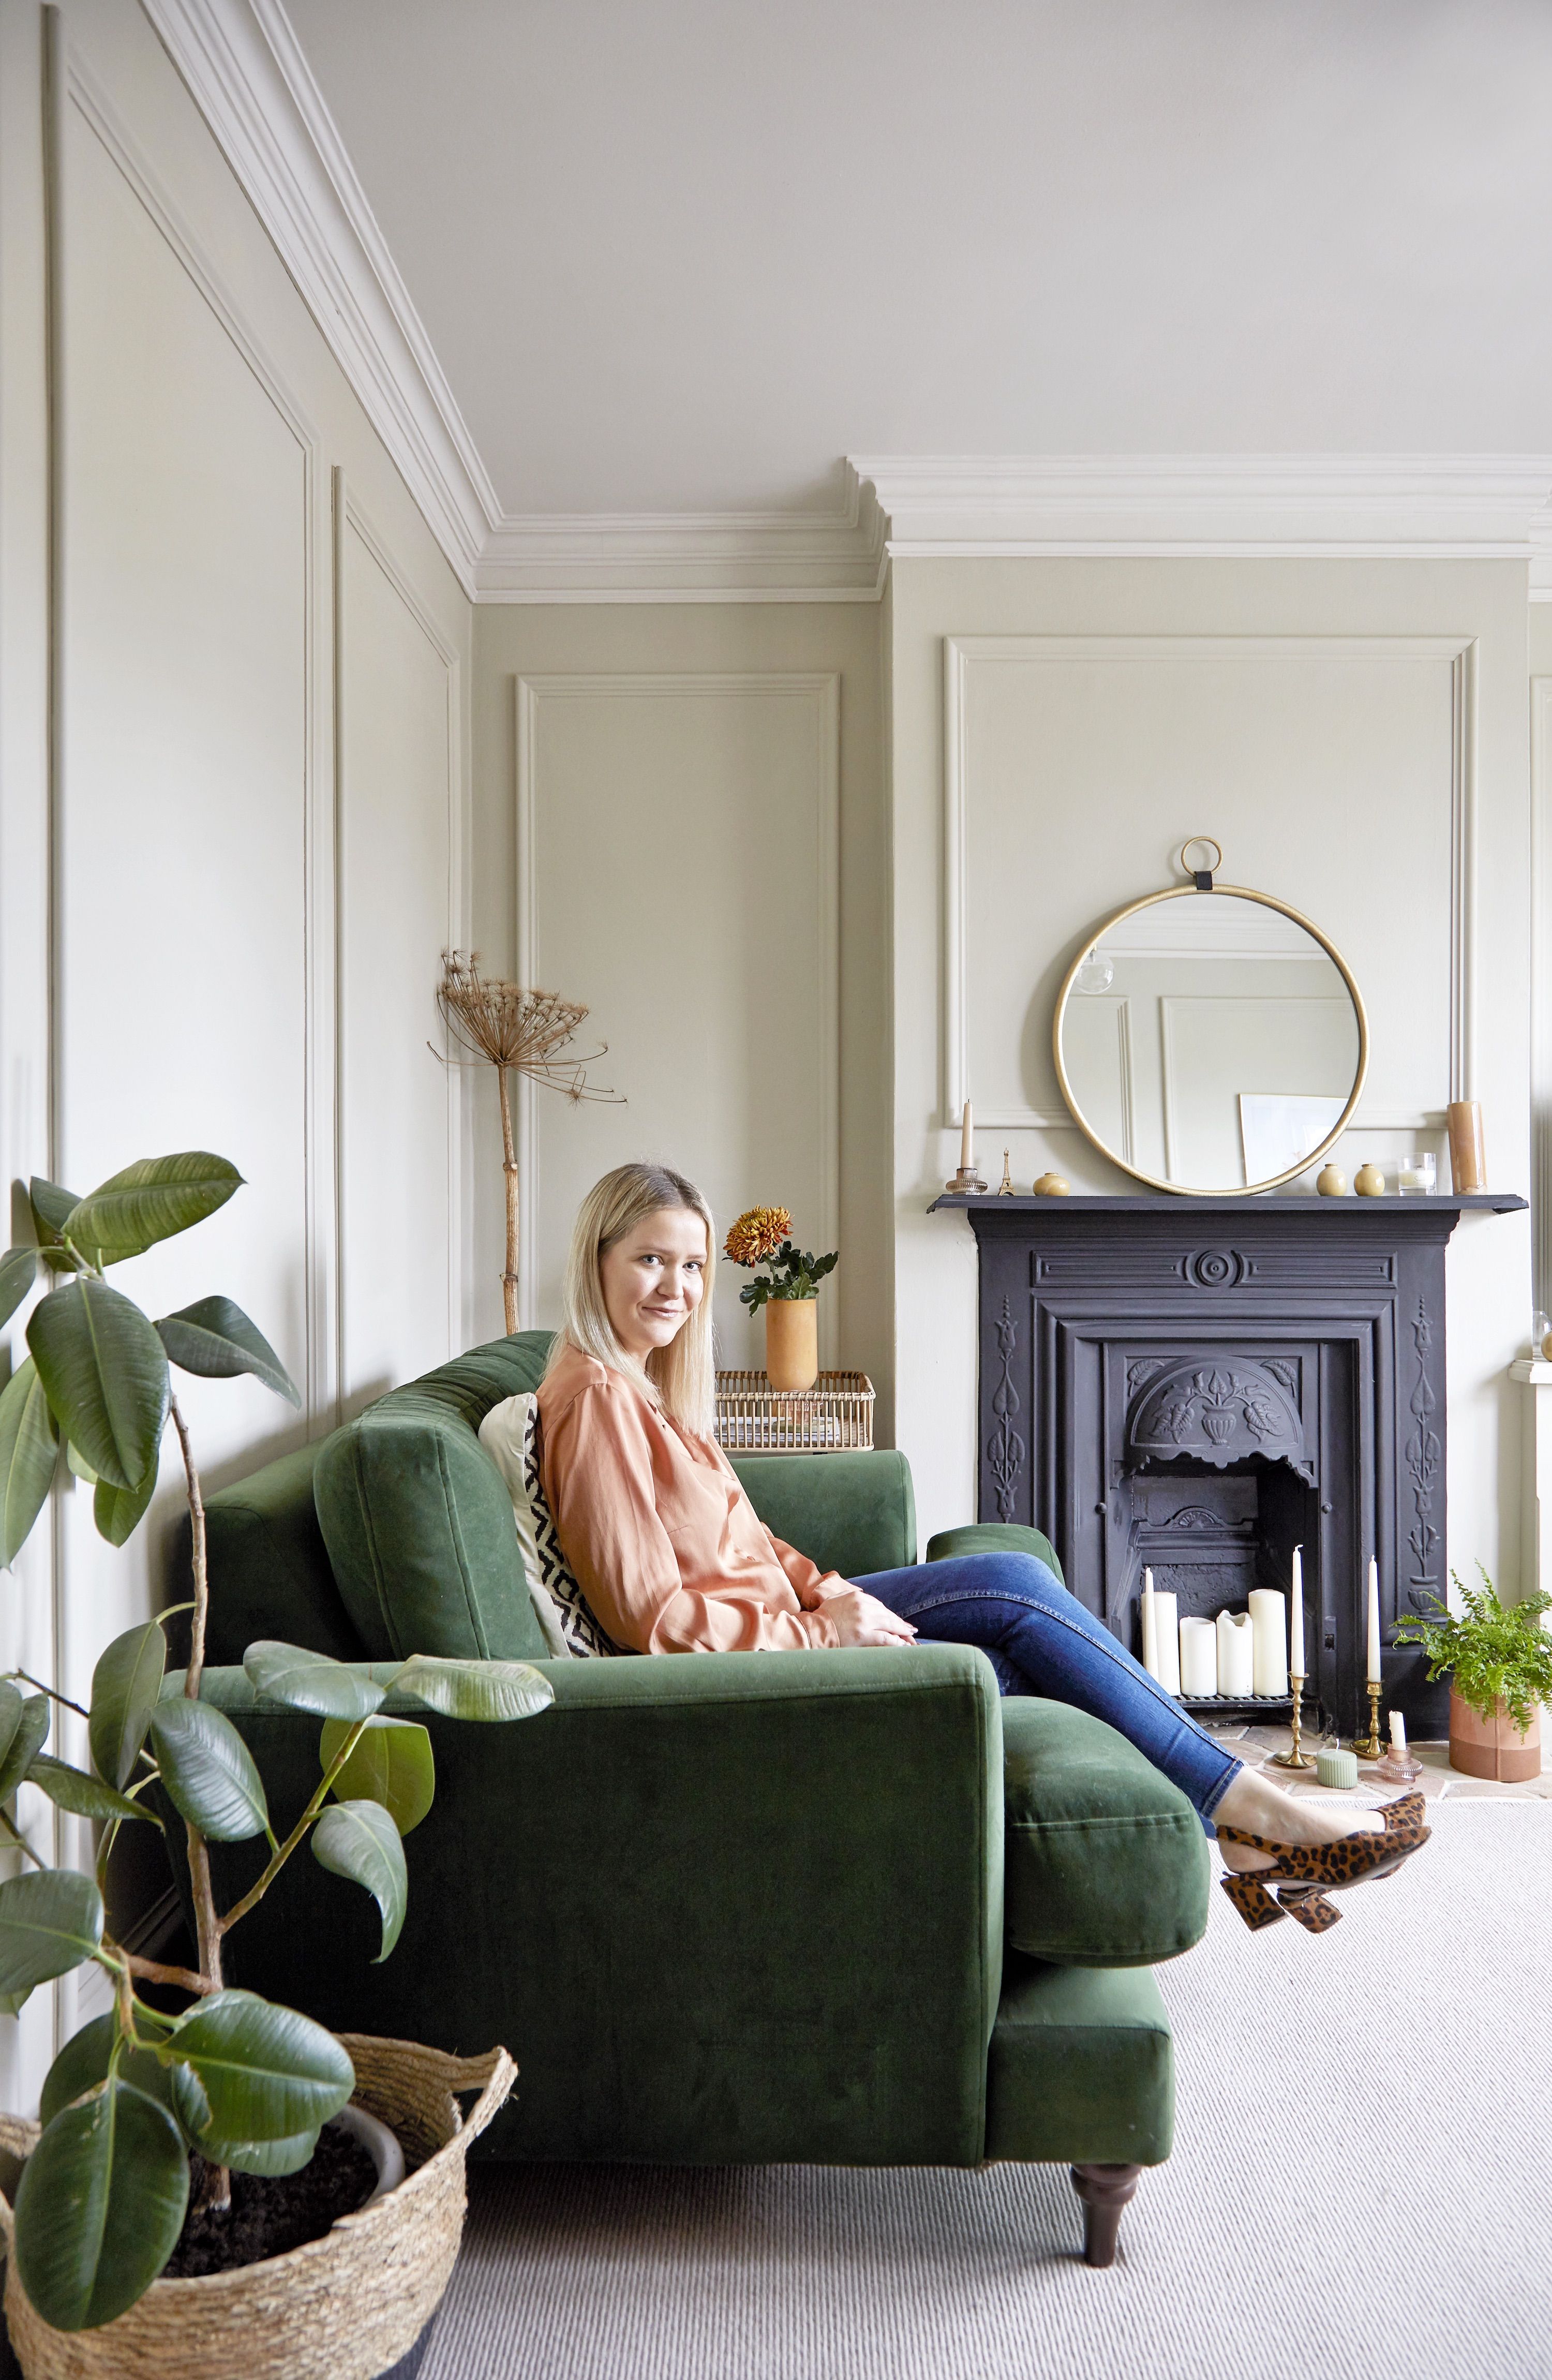 This Buckinghamshire Home Is A Masterclass In Warm Neutrals